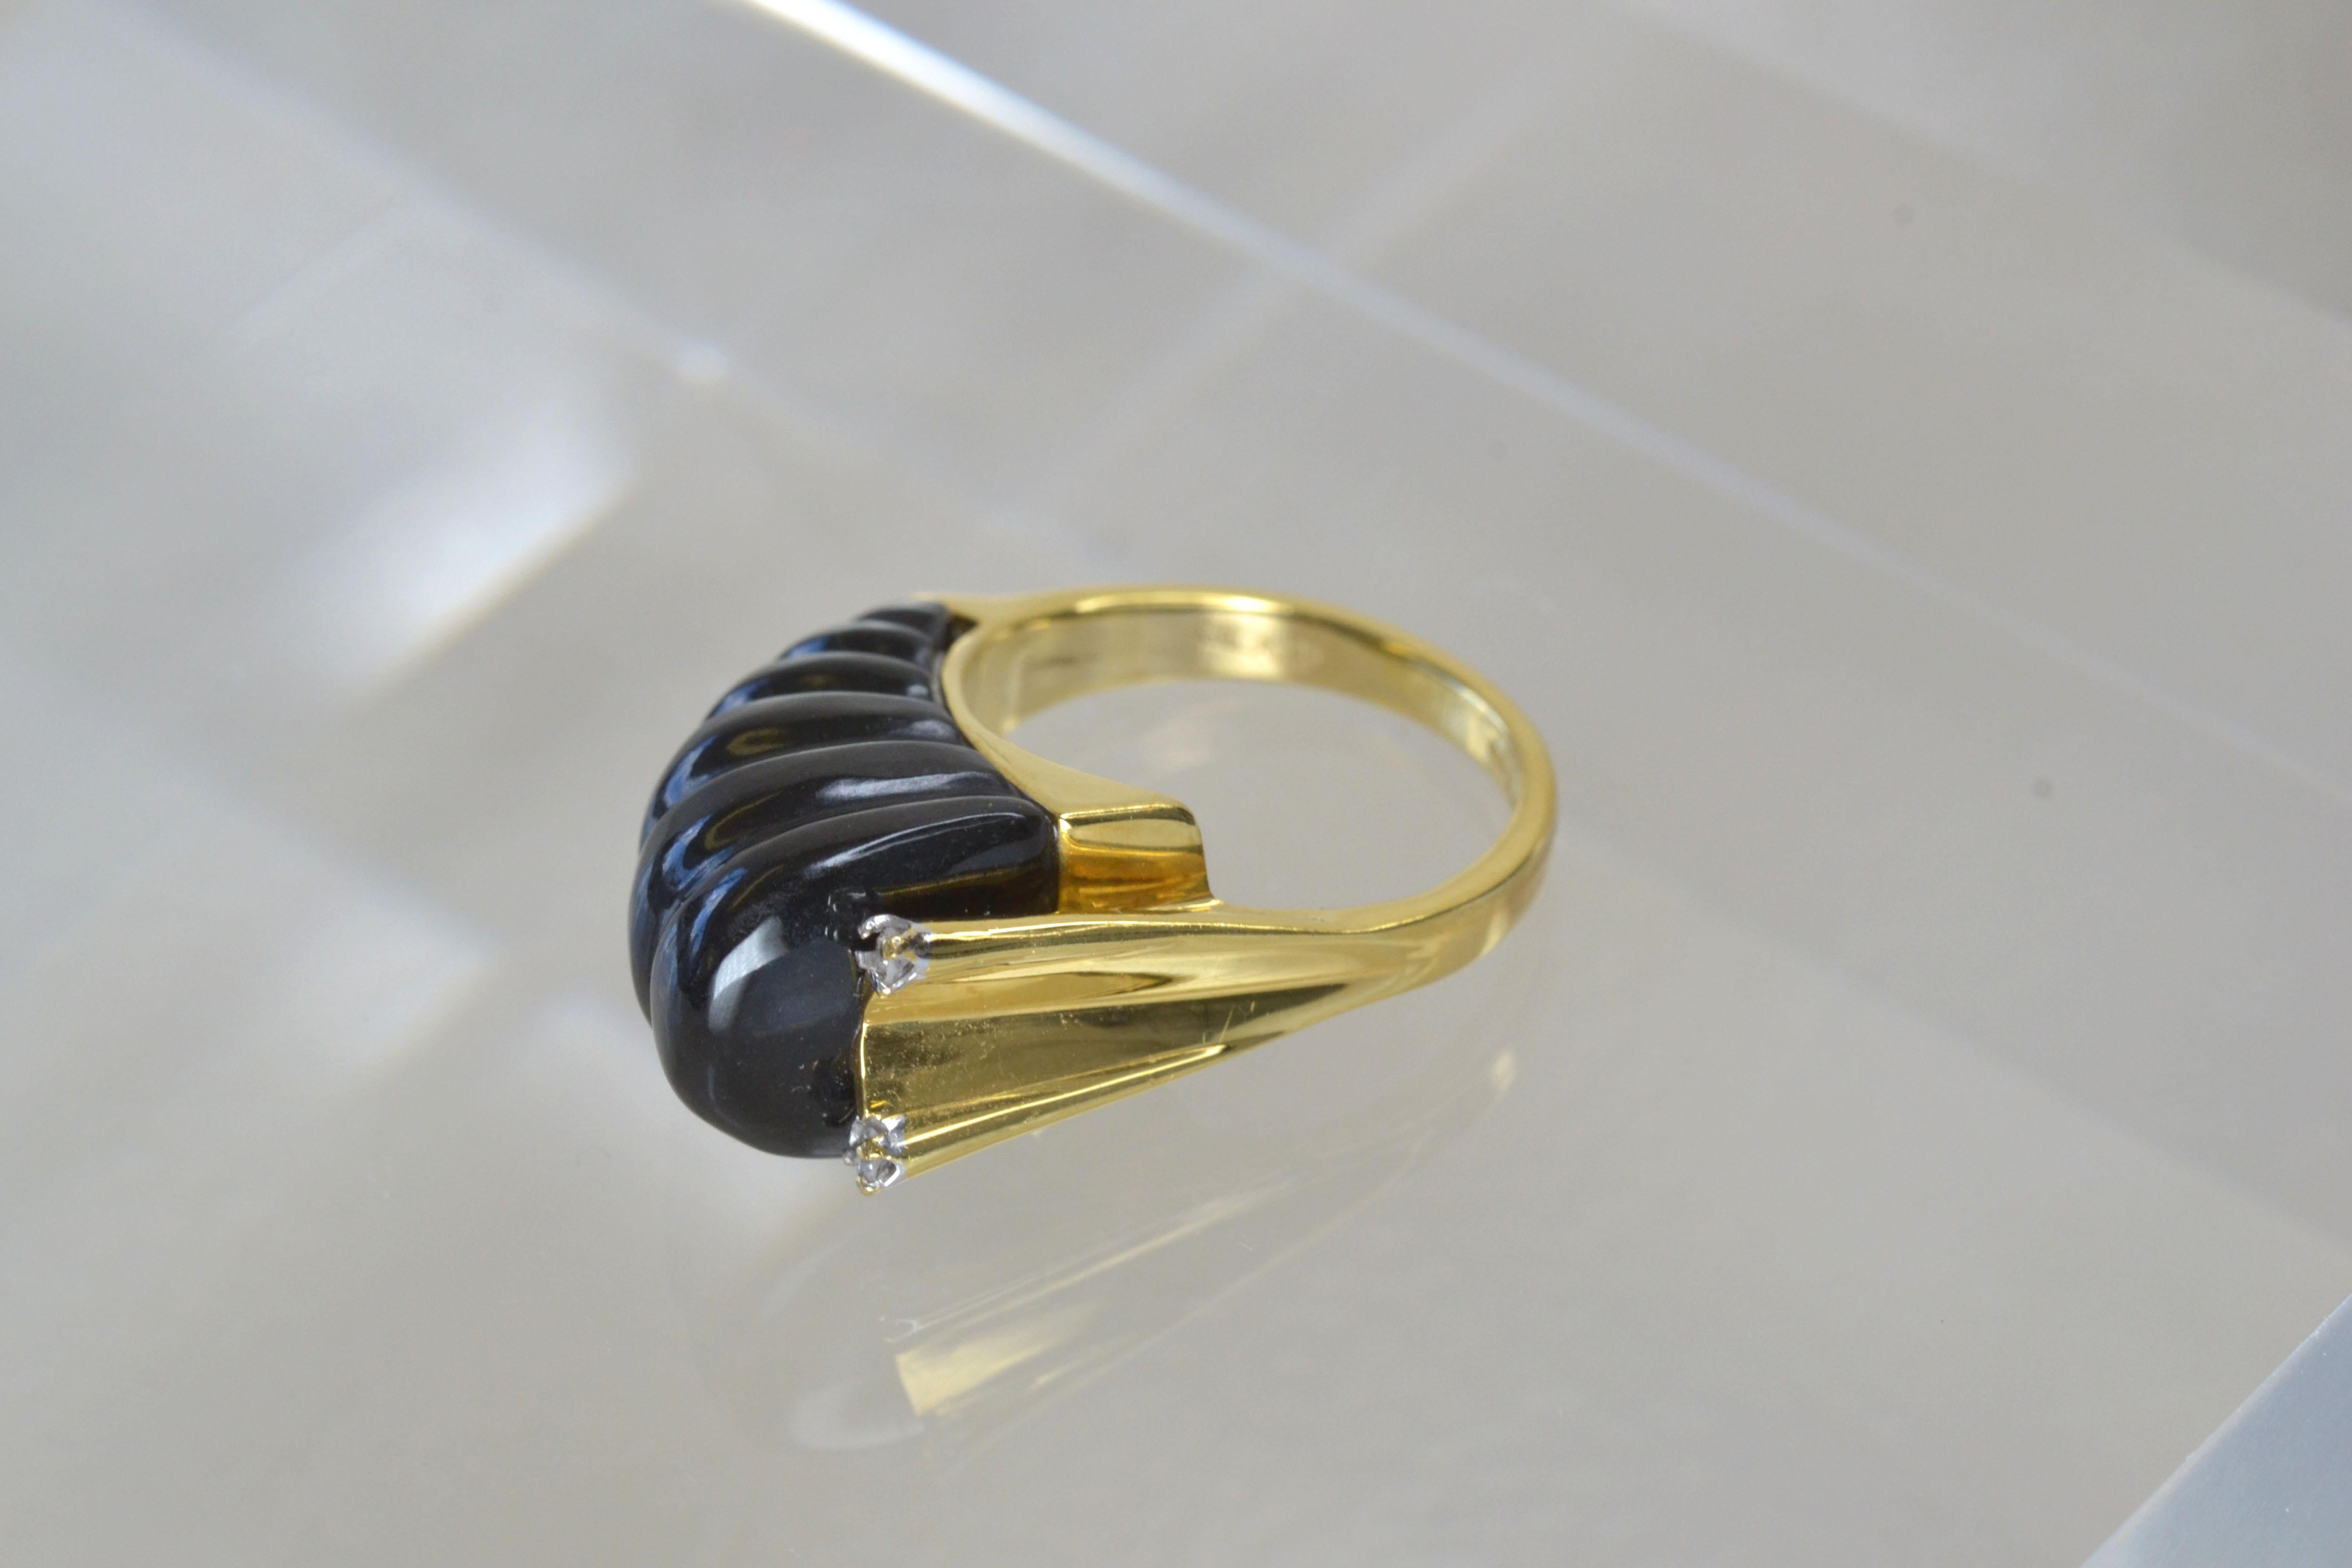 Vintage 14k Gold Black Onyx Half Scalloped Ring with Diamonds, One-of-a-kind In Good Condition For Sale In London, GB